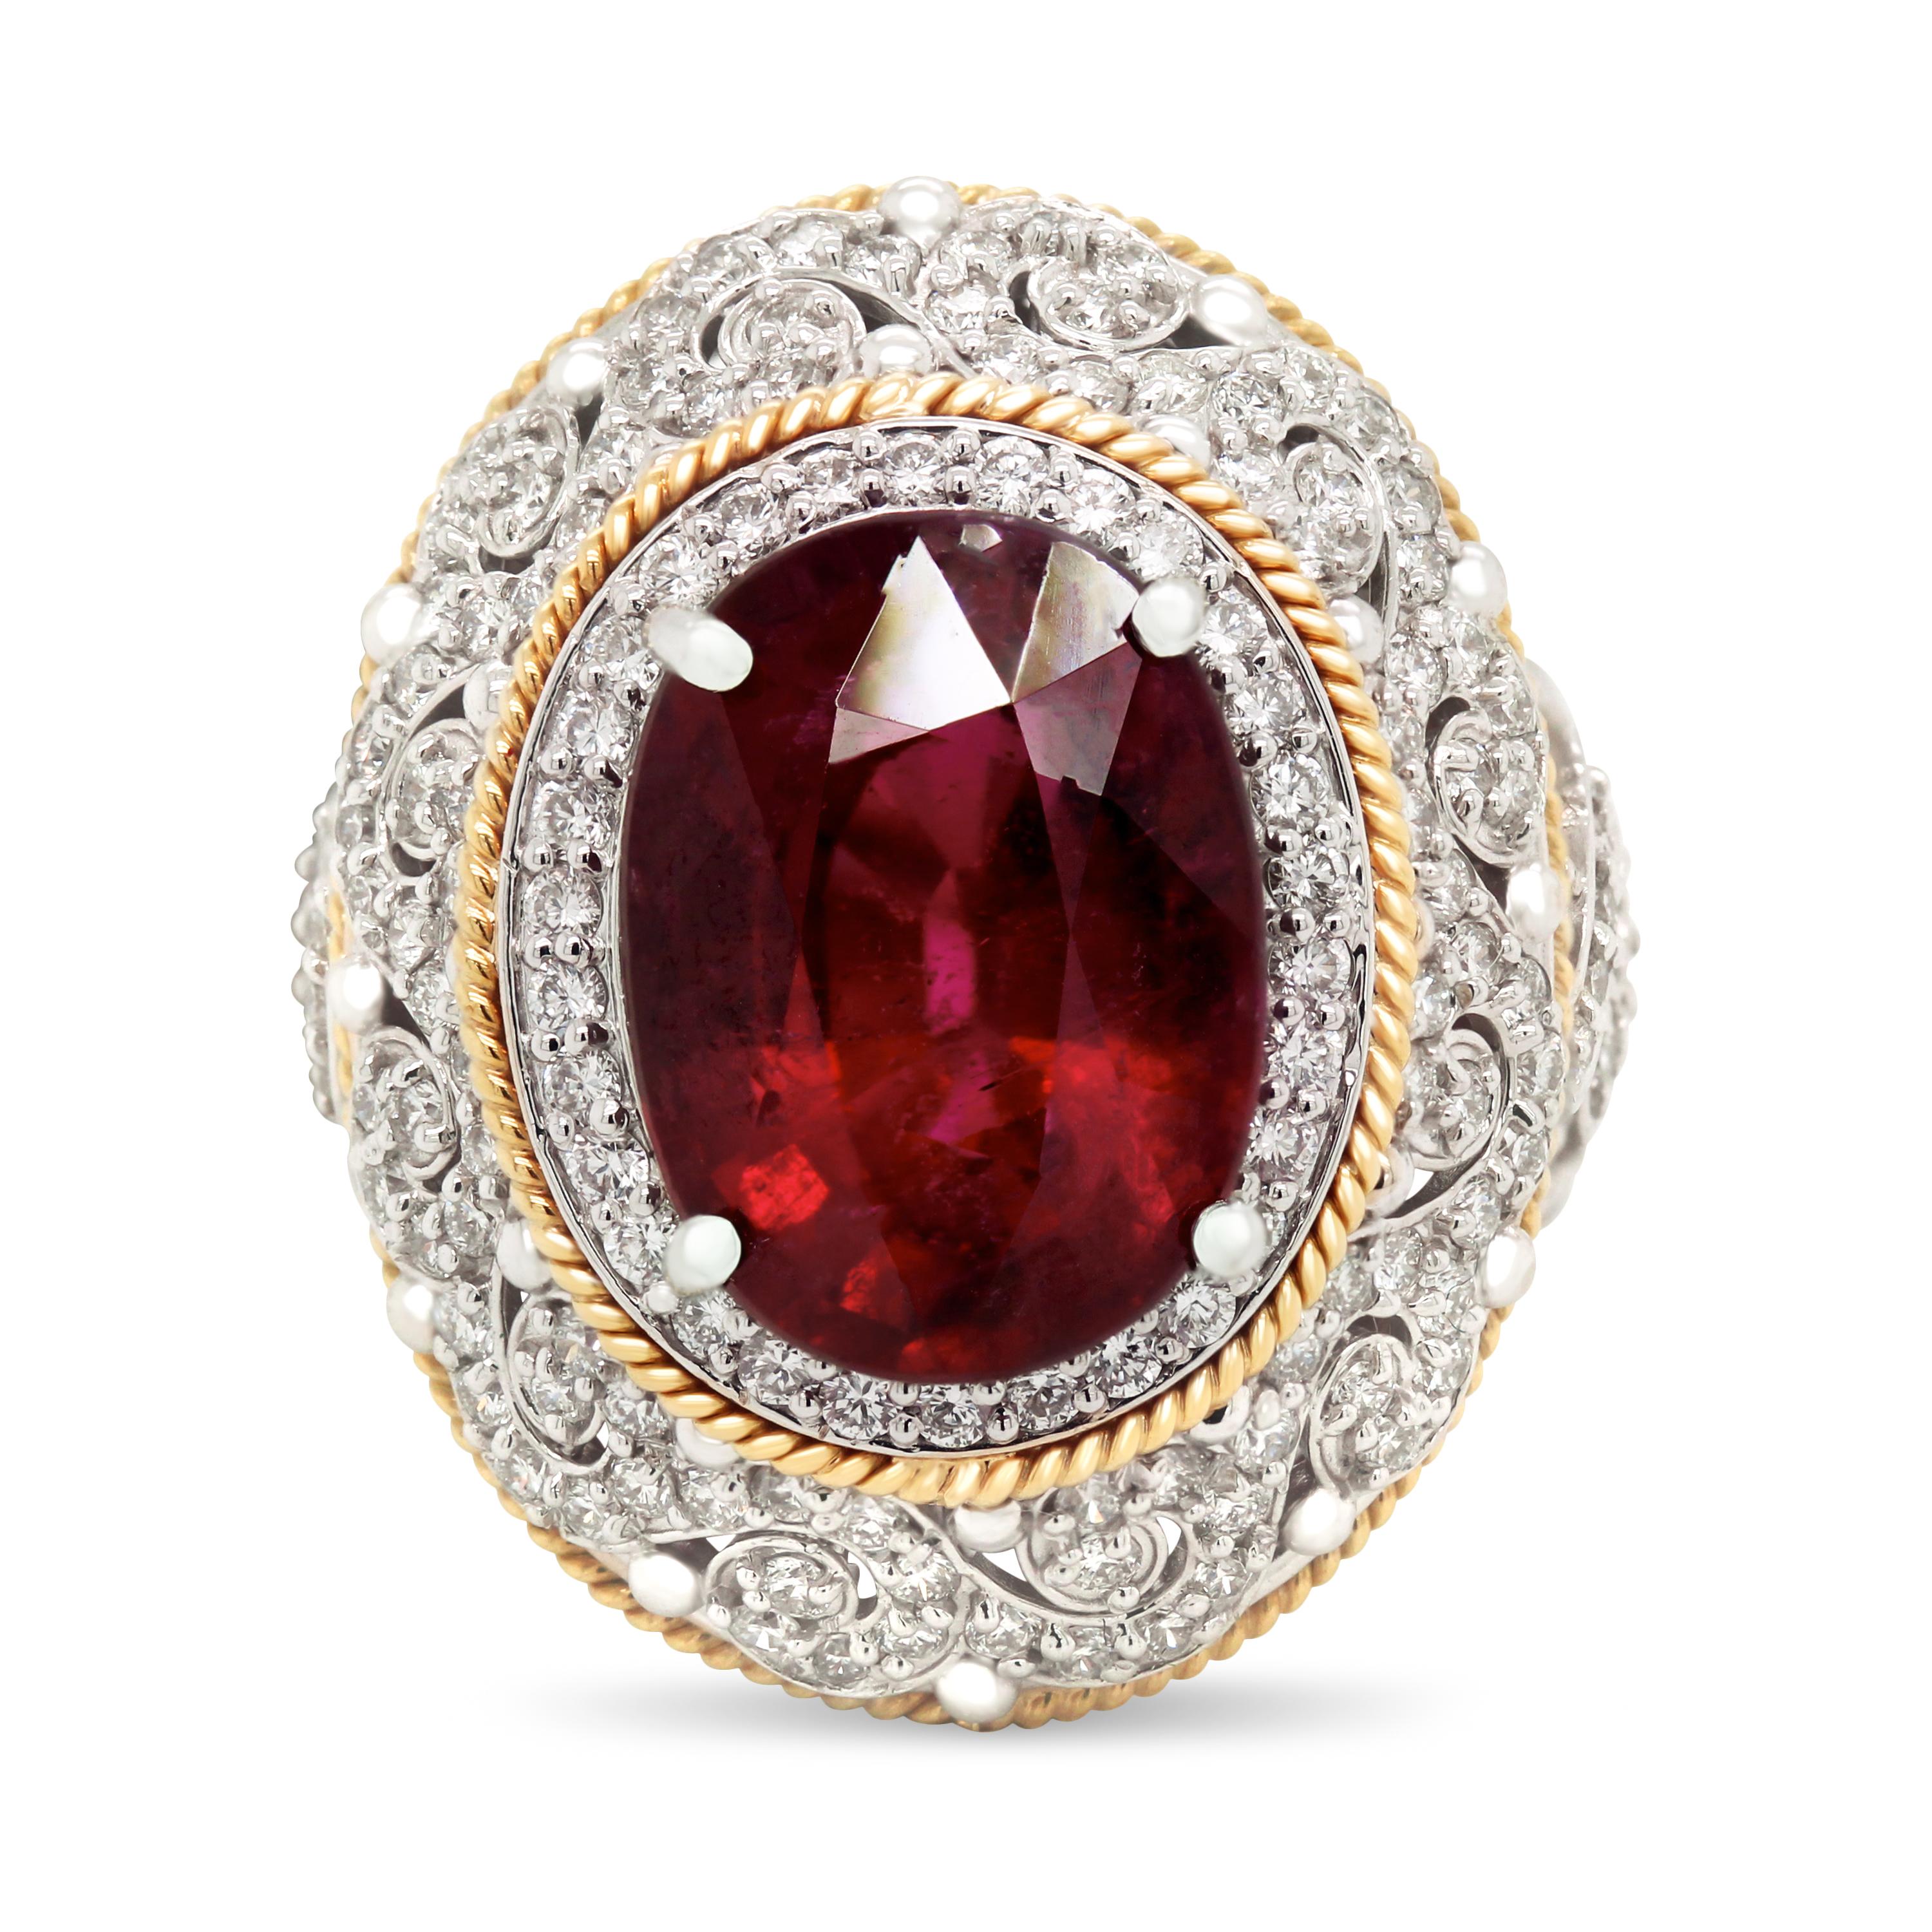 Stambolian 7.83 carat Rubelite Diamond 18K Yellow White Gold Cocktail Ring

This one-of-a-kind ring by Stambolian features a collectors quality Rubelite center that is set in this specially made ring with diamonds all throughout.

Rubelite is an